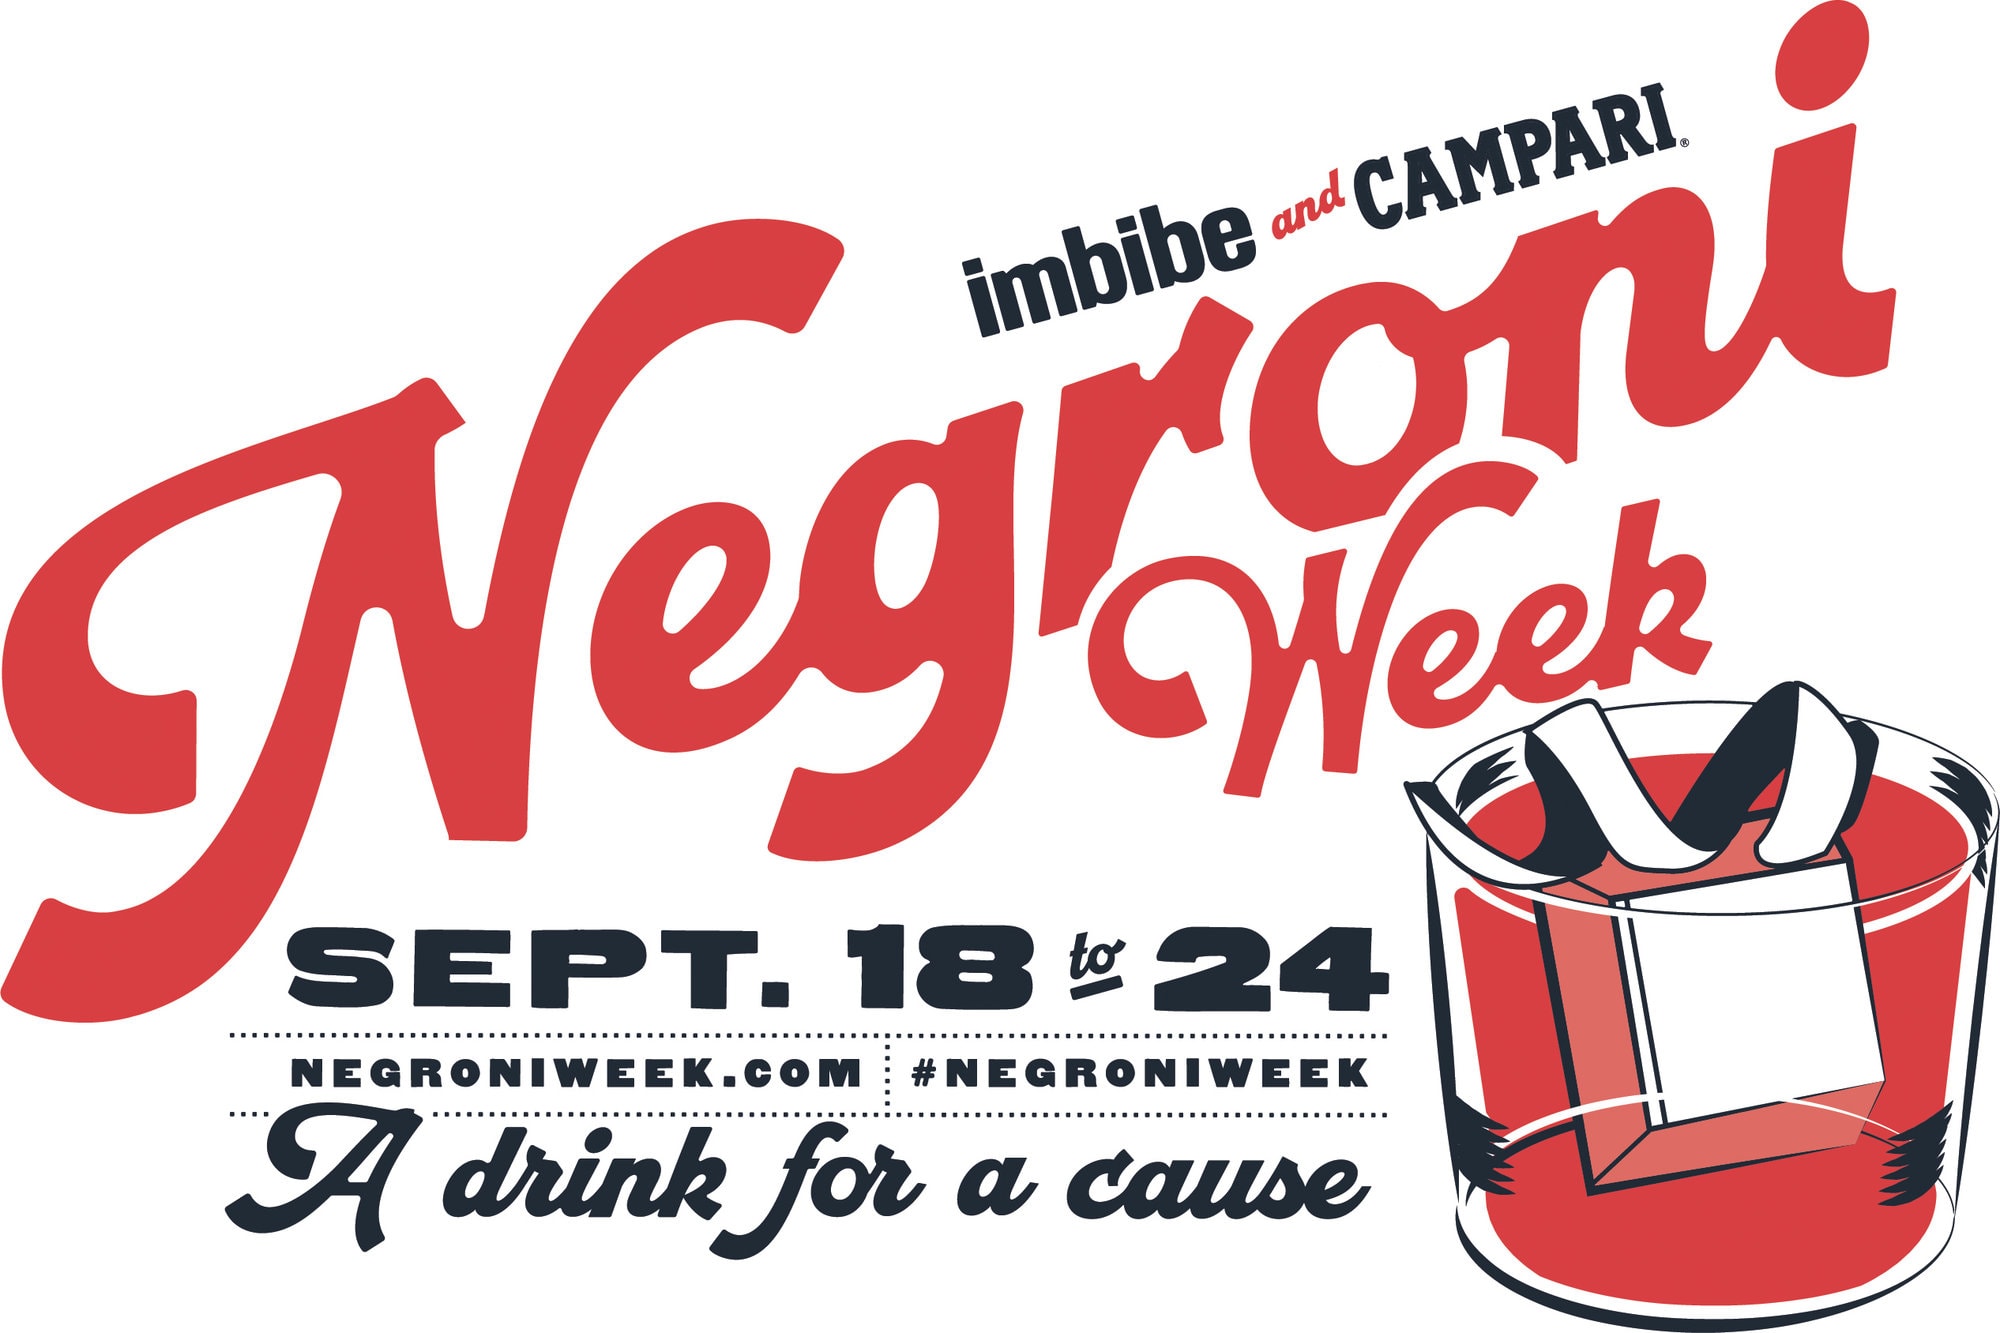 Negroni Week 2023 Takes Place September 18-24, and Registration Is Open!